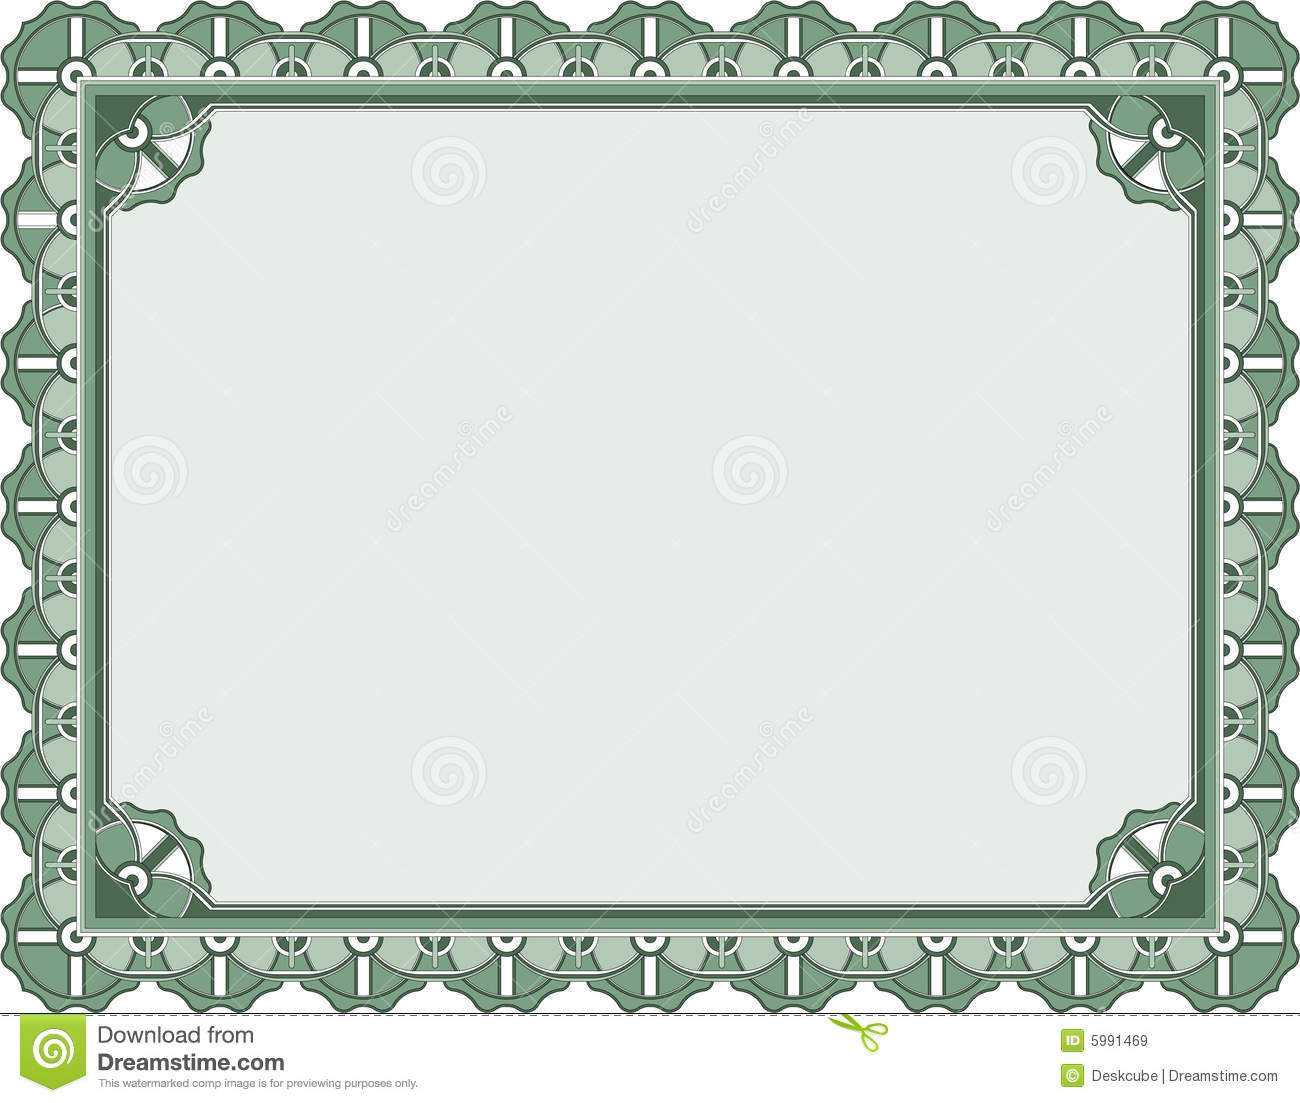 Award Certificate Template Stock Vector. Illustration Of Throughout Award Certificate Border Template